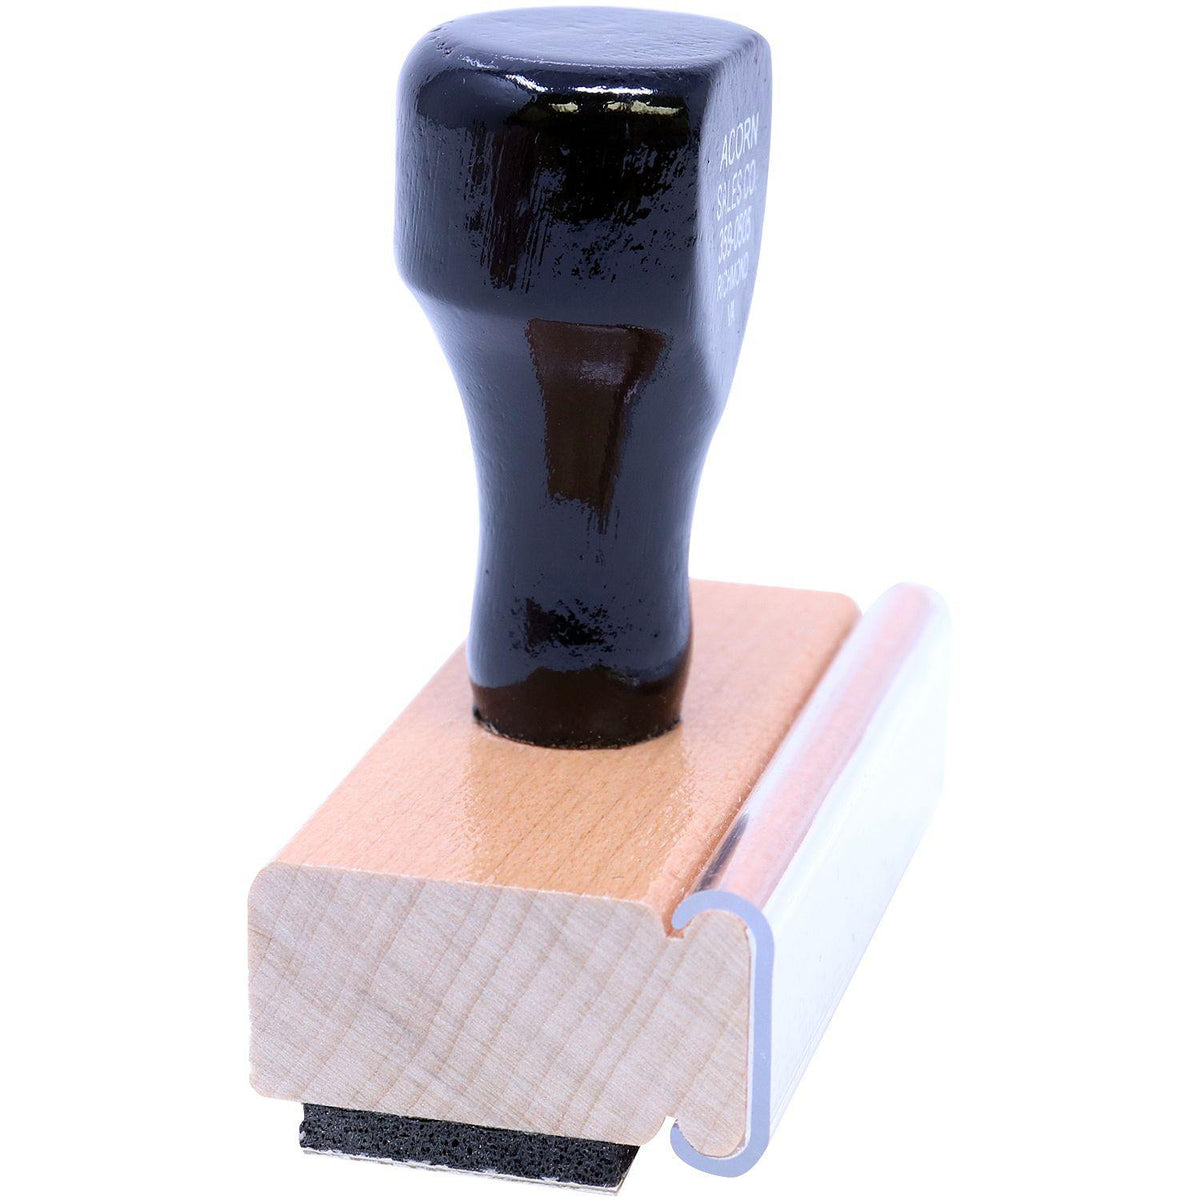 Return for Better Address Rubber Stamp - Engineer Seal Stamps - Brand_Acorn, Impression Size_Small, Stamp Type_Regular Stamp, Type of Use_Postal &amp; Mailing, Type of Use_Shipping &amp; Receiving